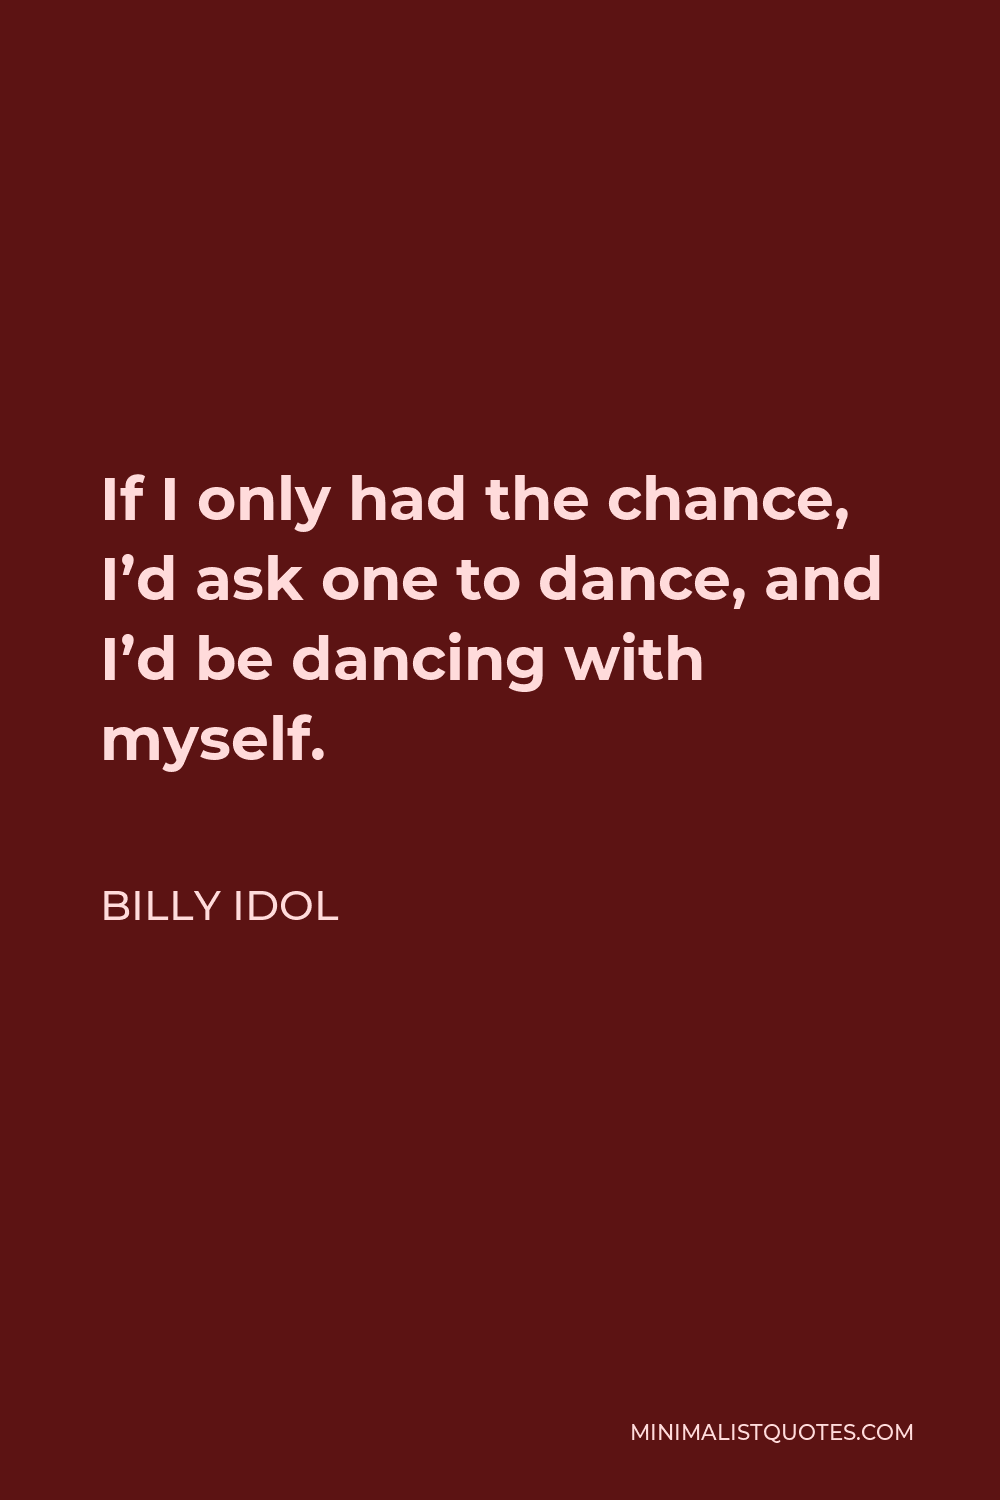 Billy Idol Quote - If I only had the chance, I’d ask one to dance, and I’d be dancing with myself.